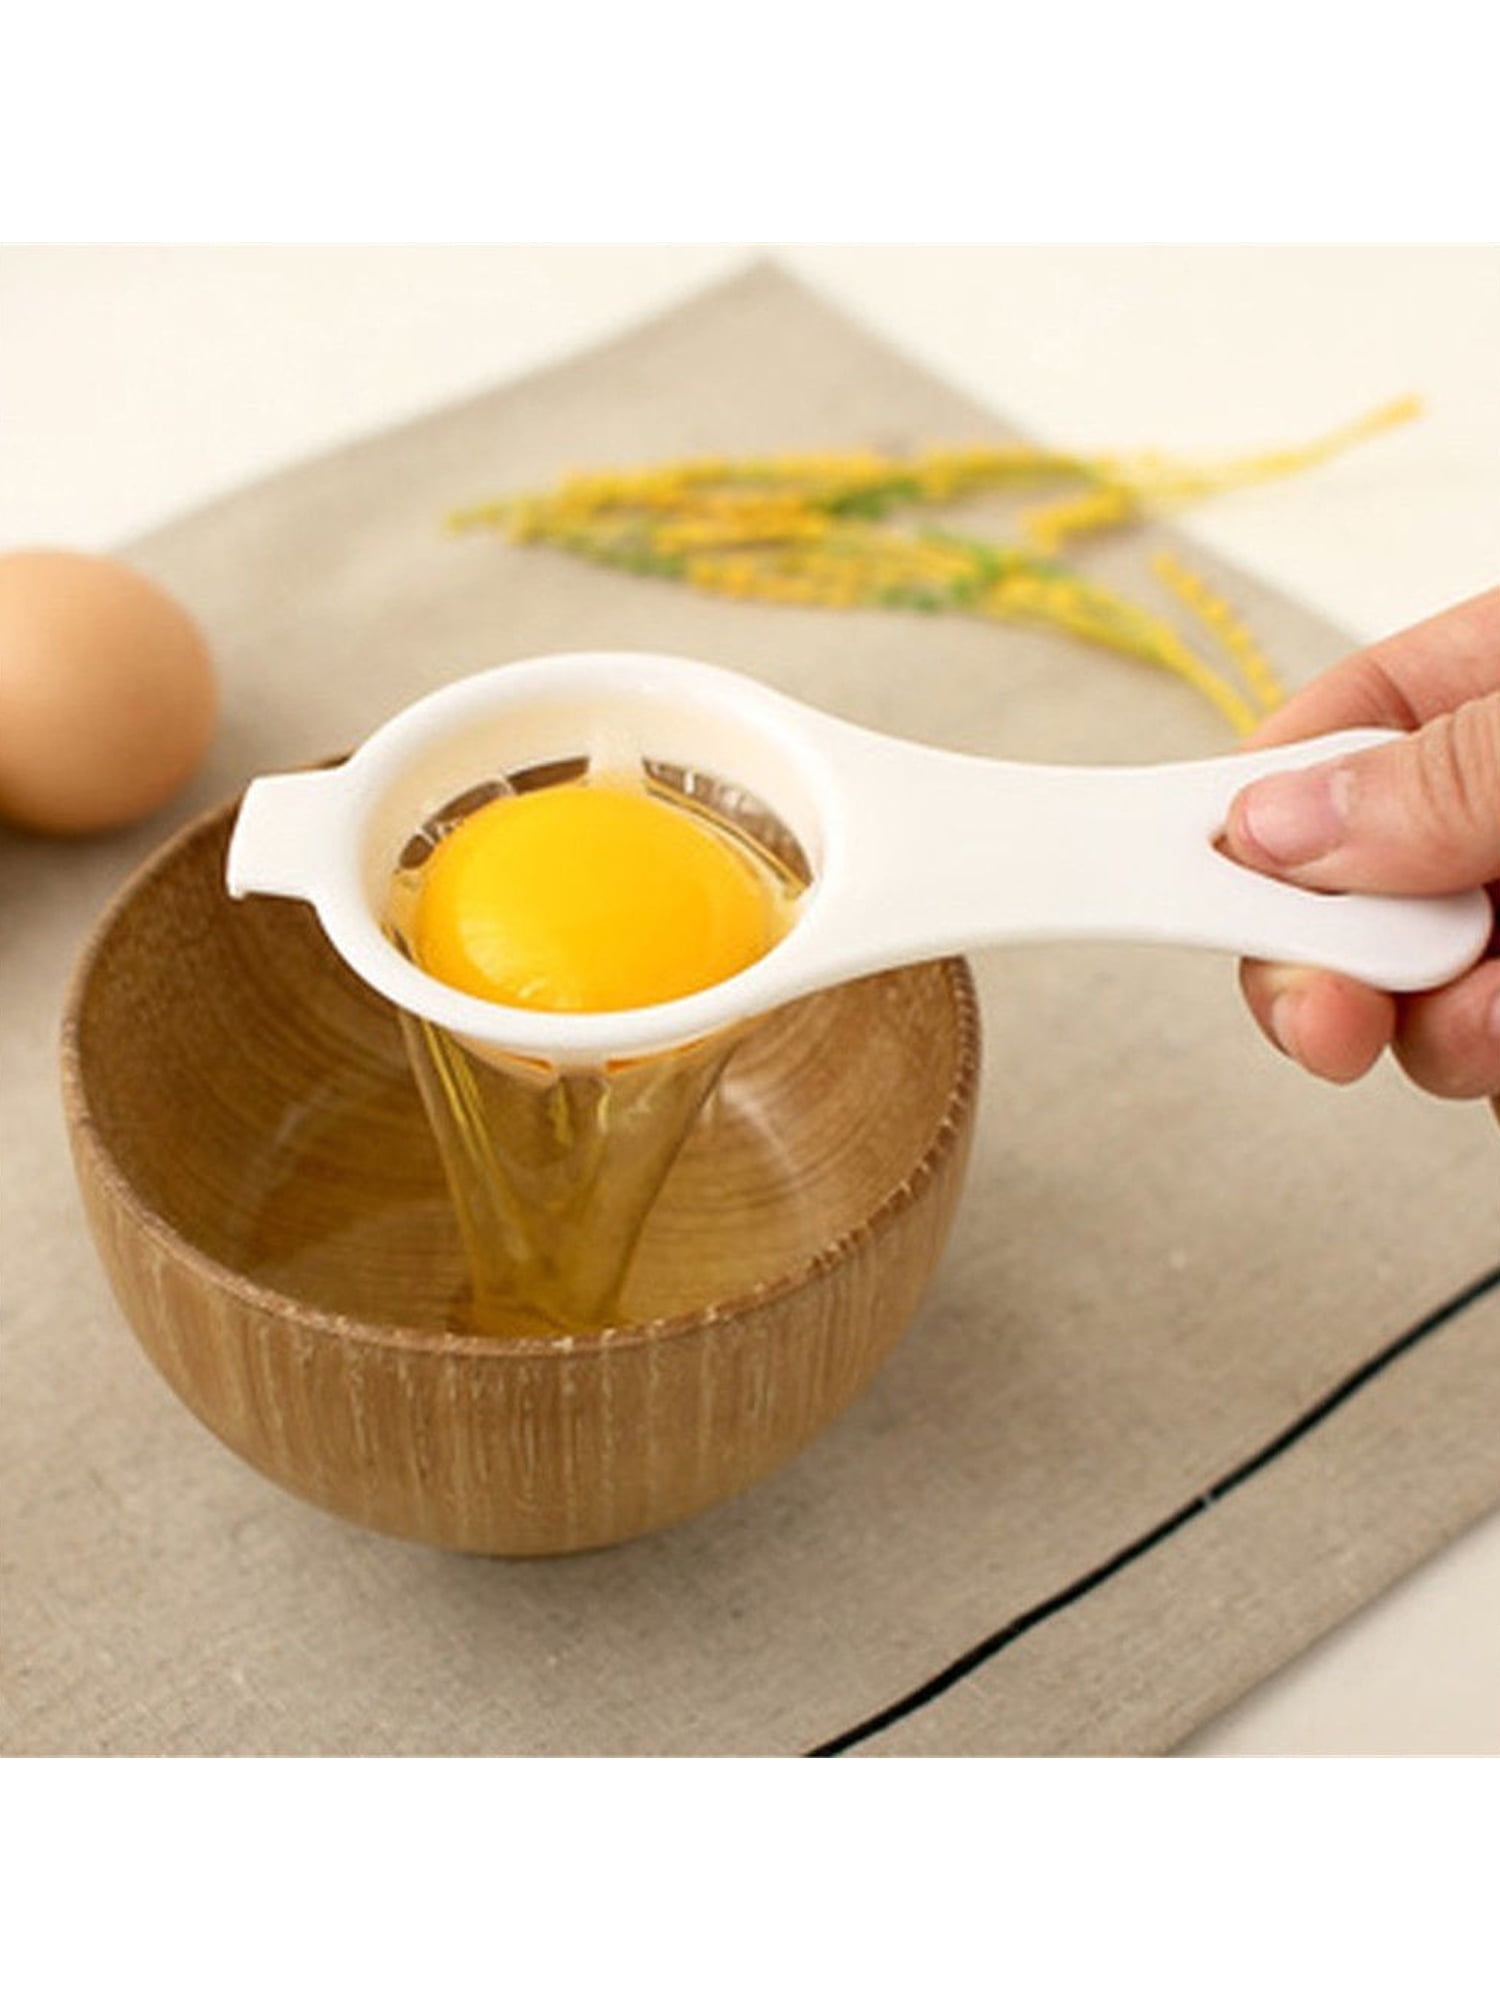 Details about   White Egg Yolk Plastic Separator Tool Easy Cooking White Sieve Kitchen Gadget